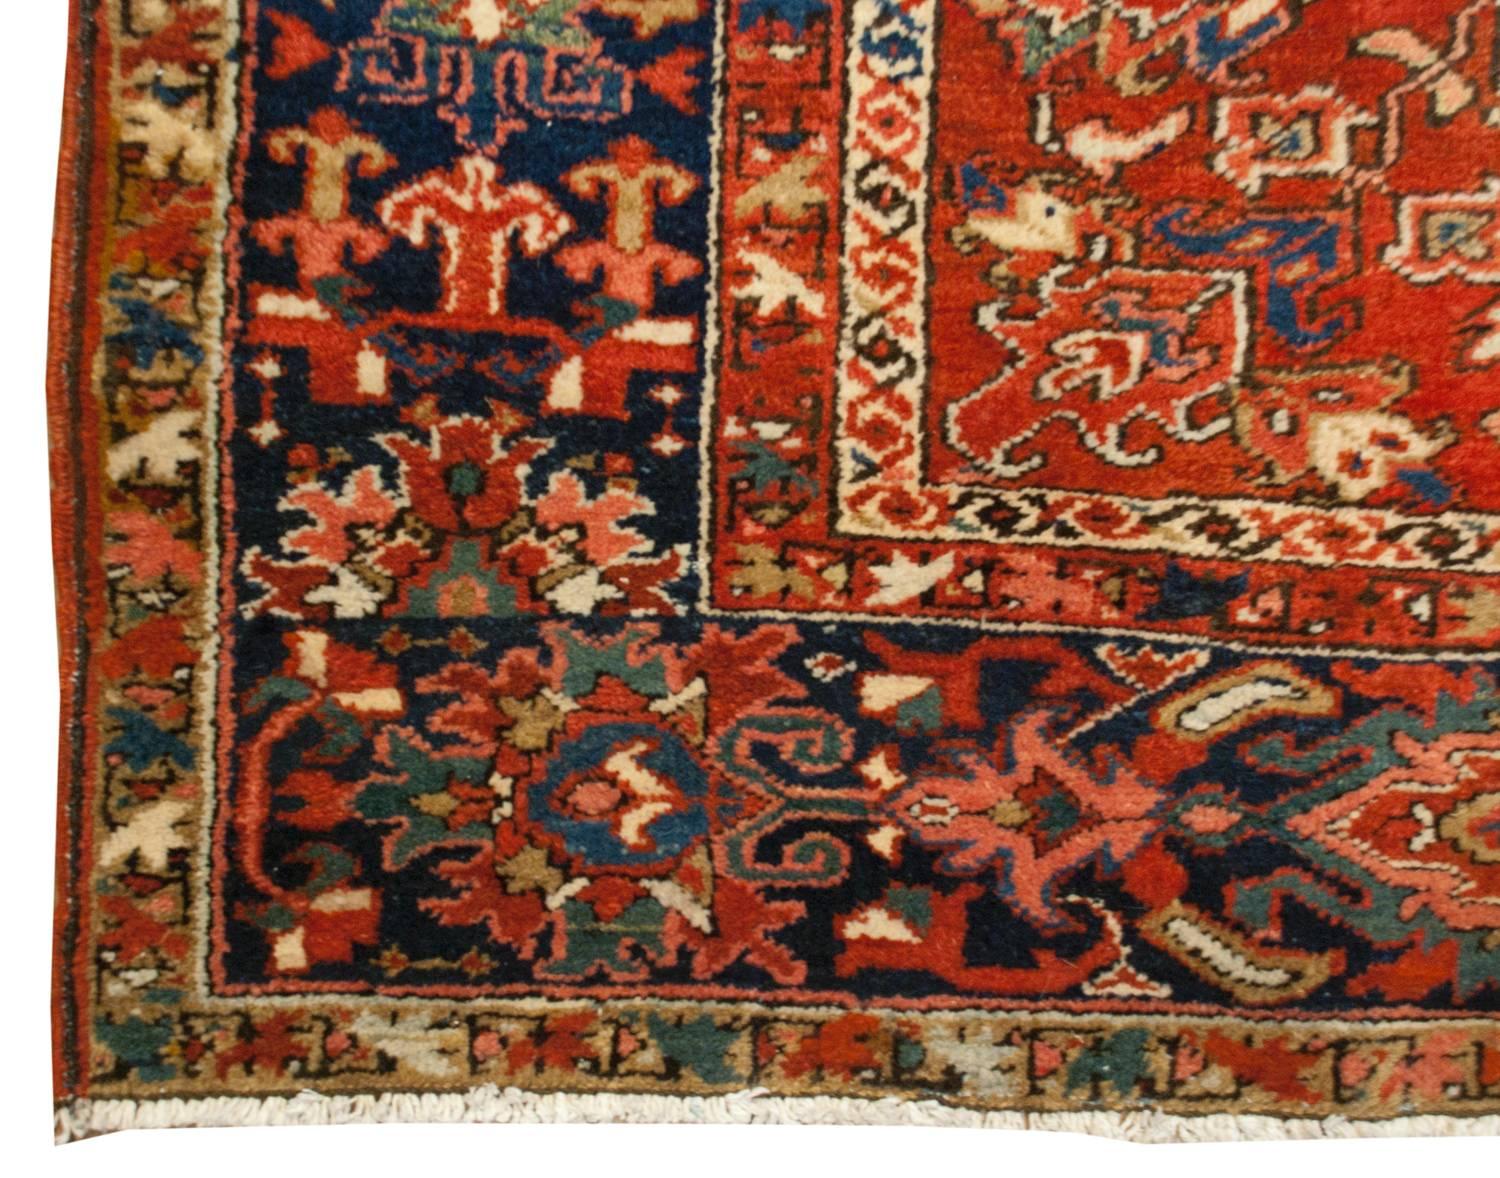 An amazing early 20th century Persian Heriz rug with an unusual design lacking the traditional large central medallion, rather, includes a small indigo medallion on a wonderfully woven mirror patterned multicolored floral and vine motif on a rich